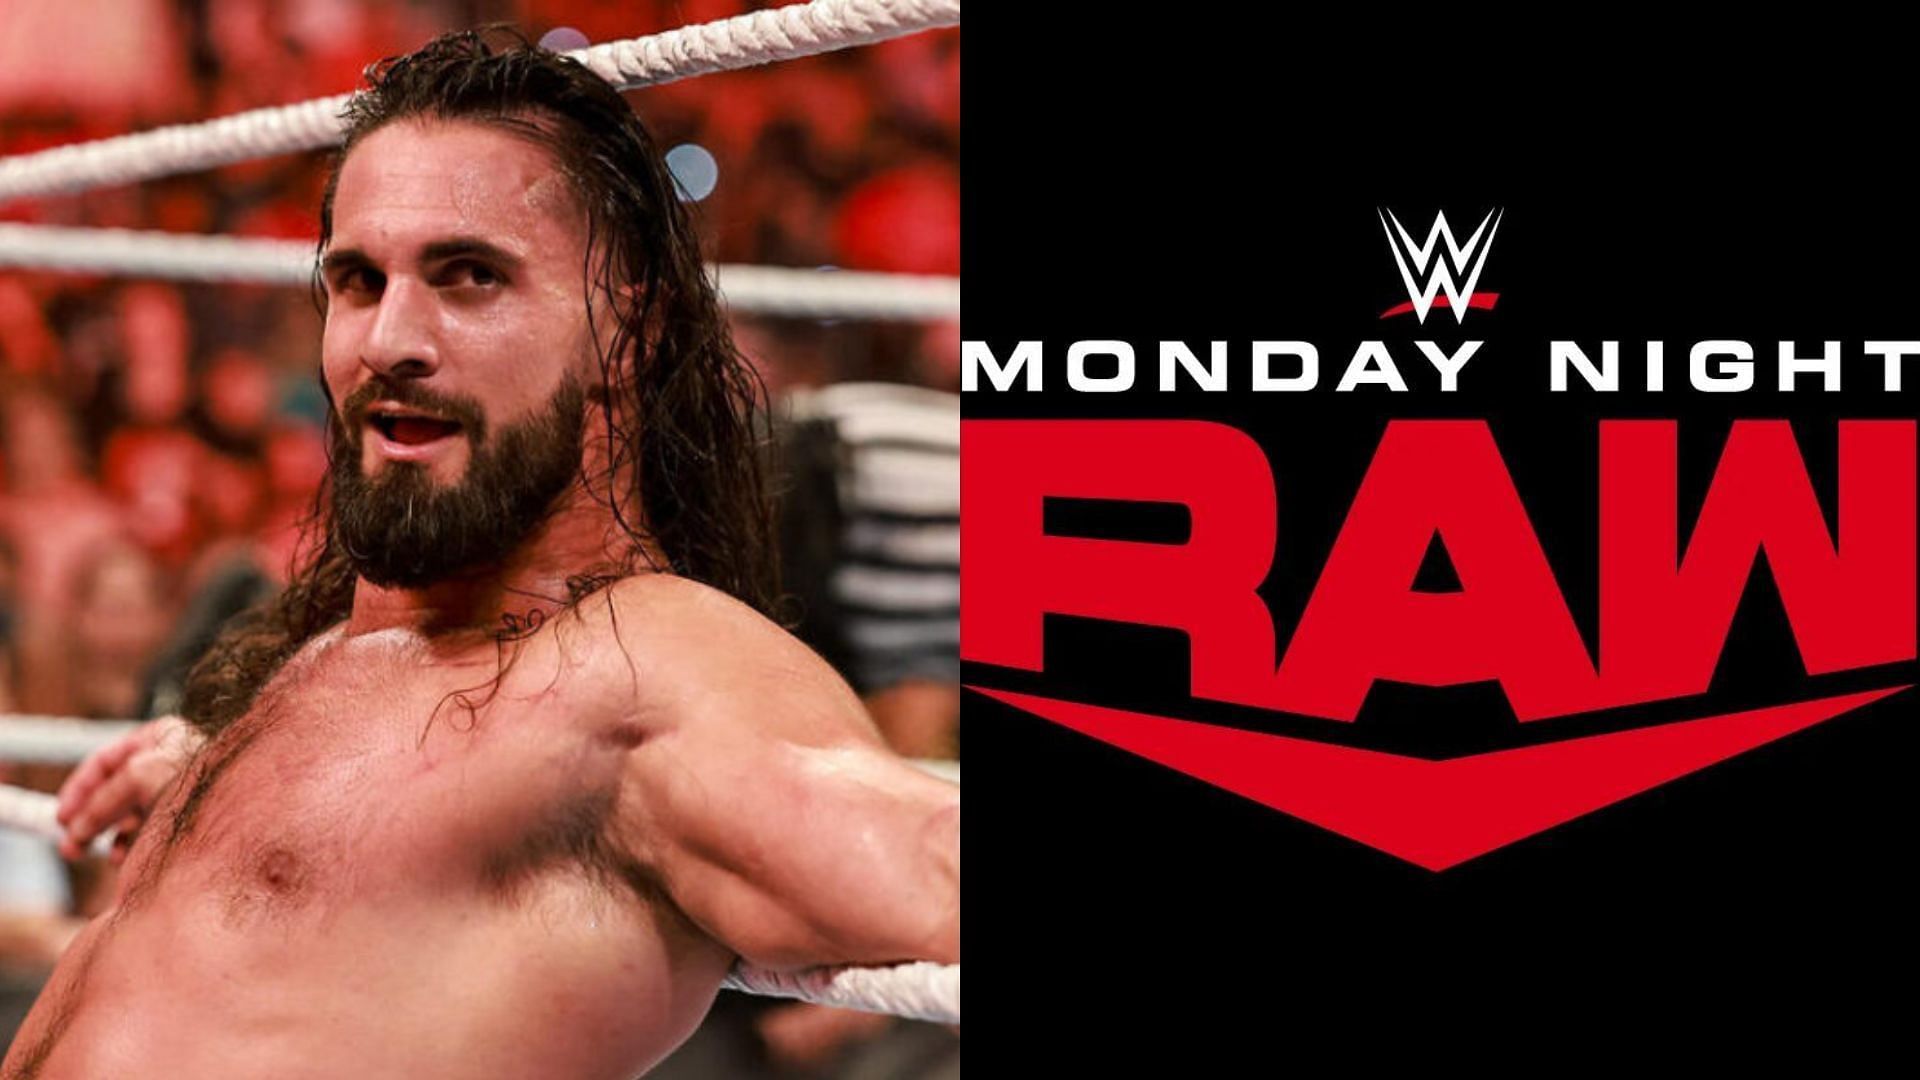 Seth Rollins will be in action tonight on WWE RAW.